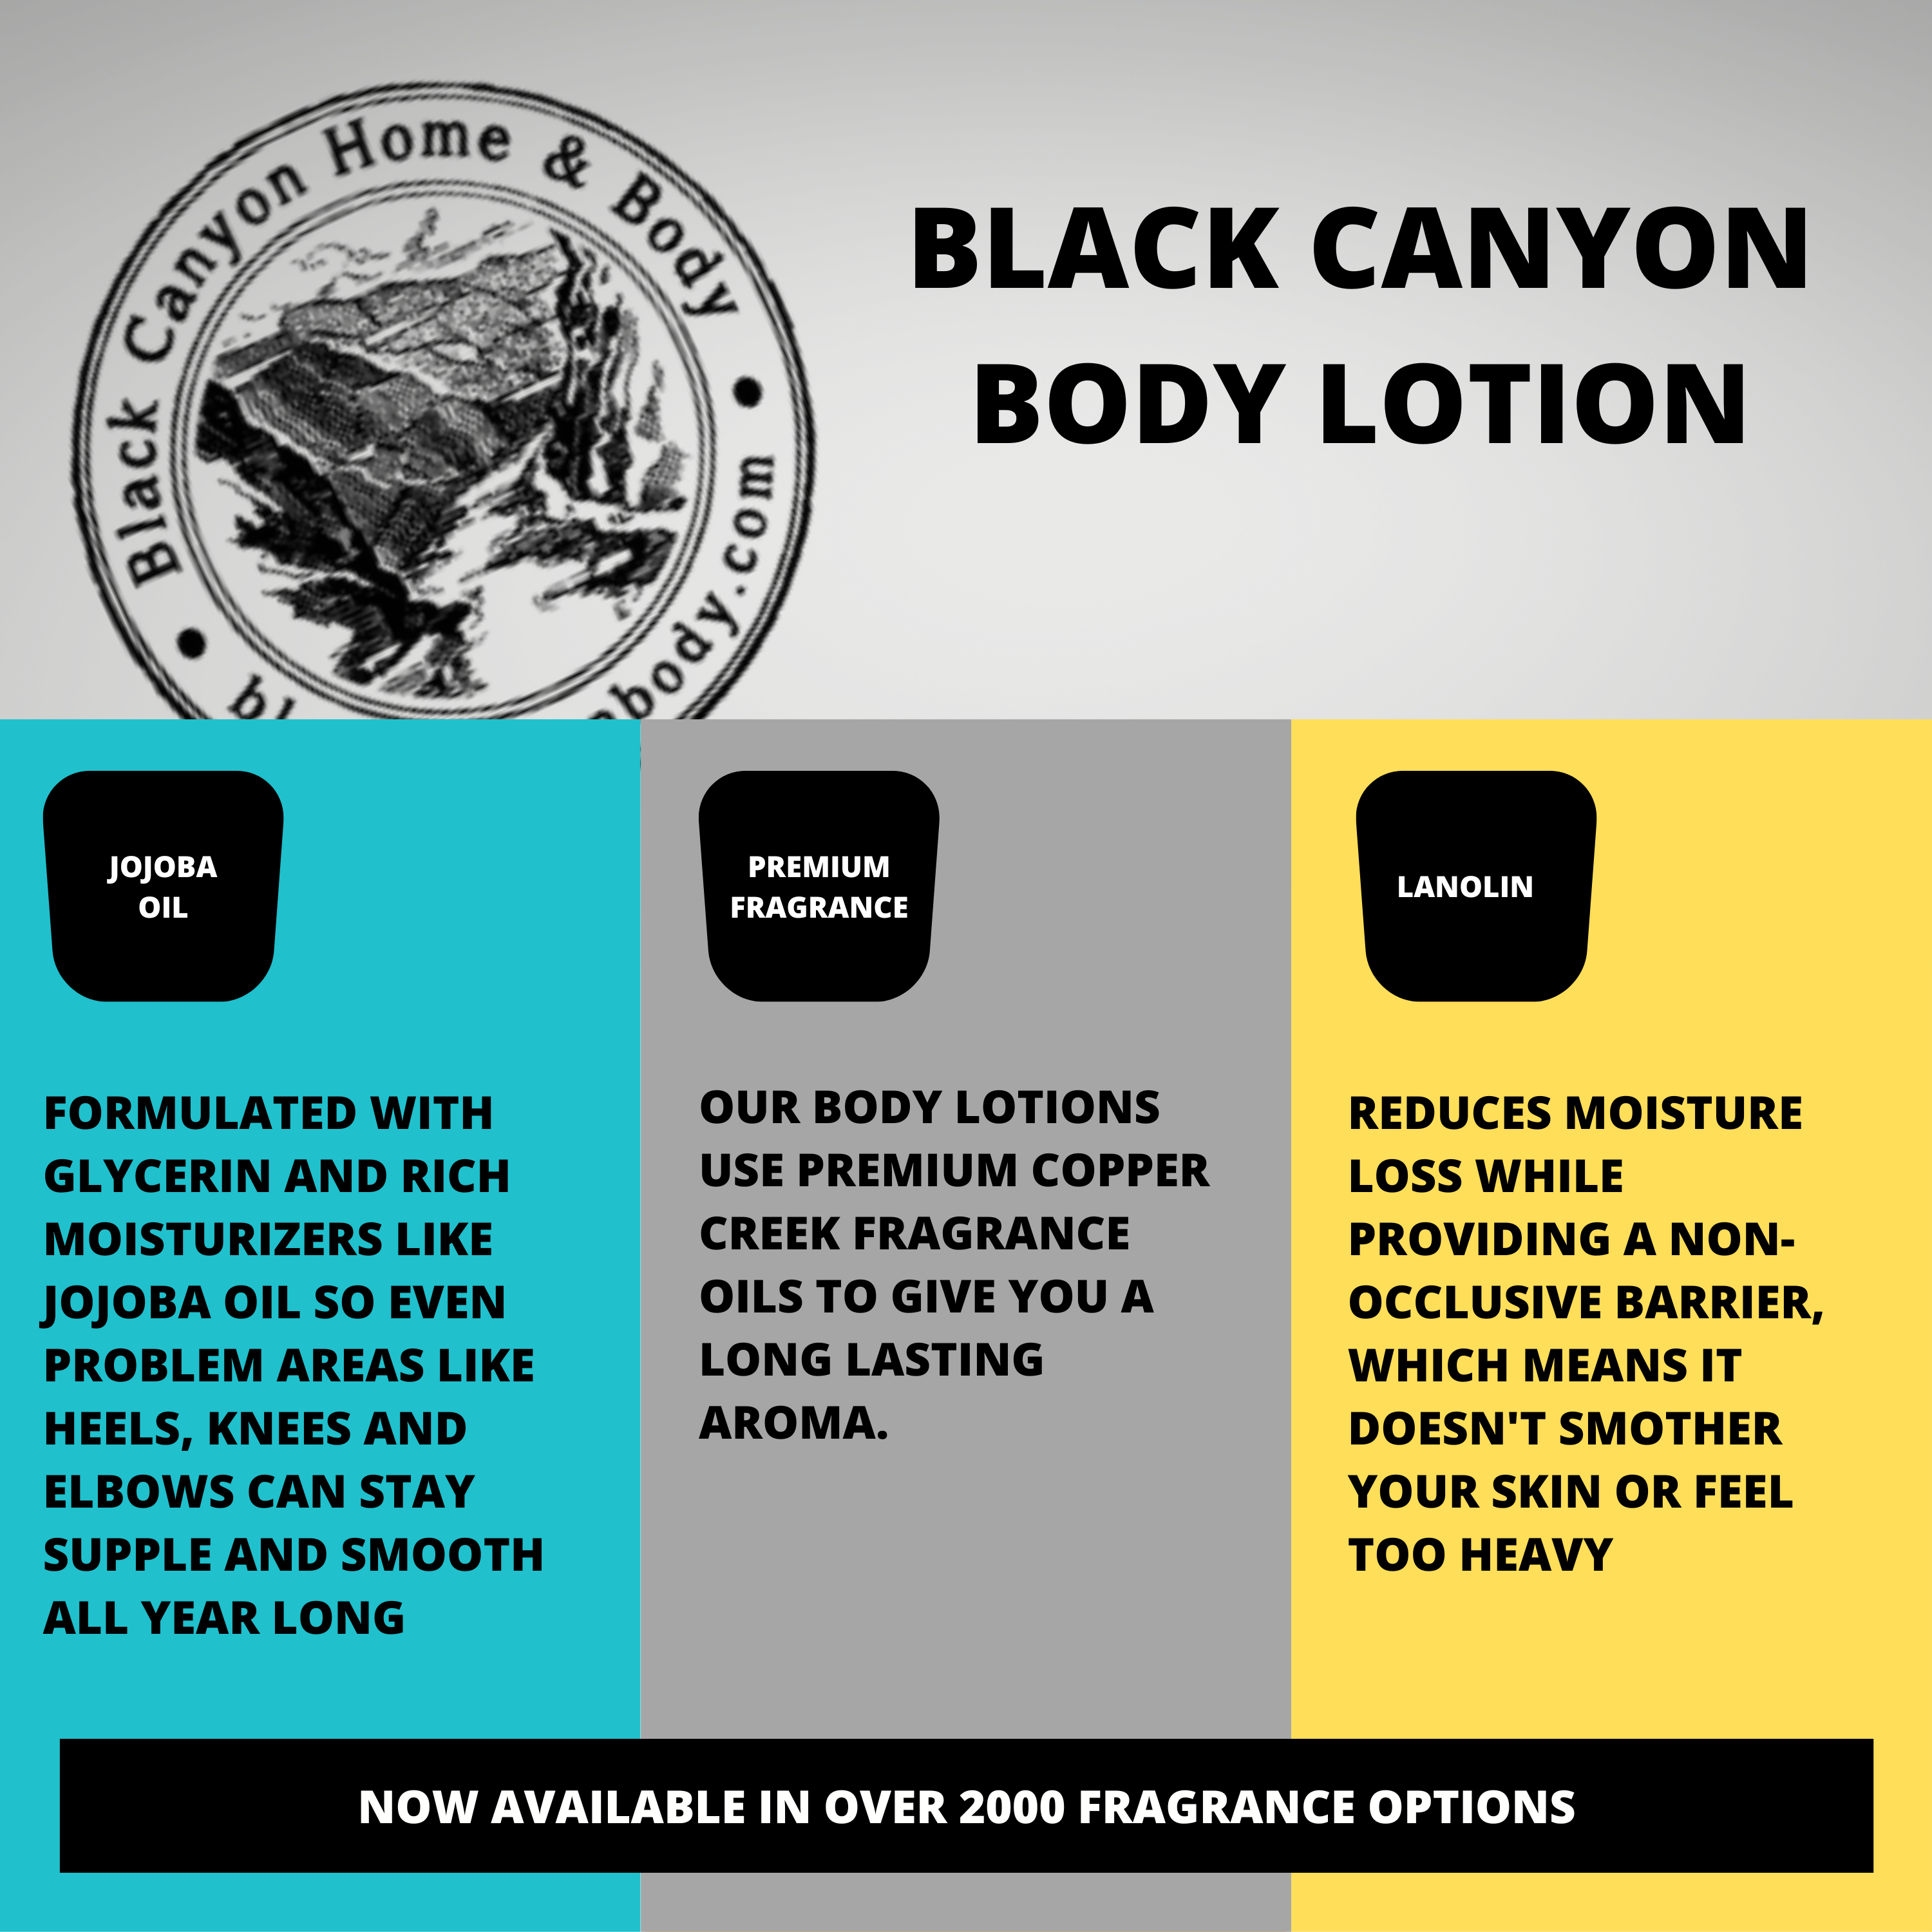 Black Canyon Desert Daylily Scented Luxury Body Lotion with Lanolin and Jojoba Oil